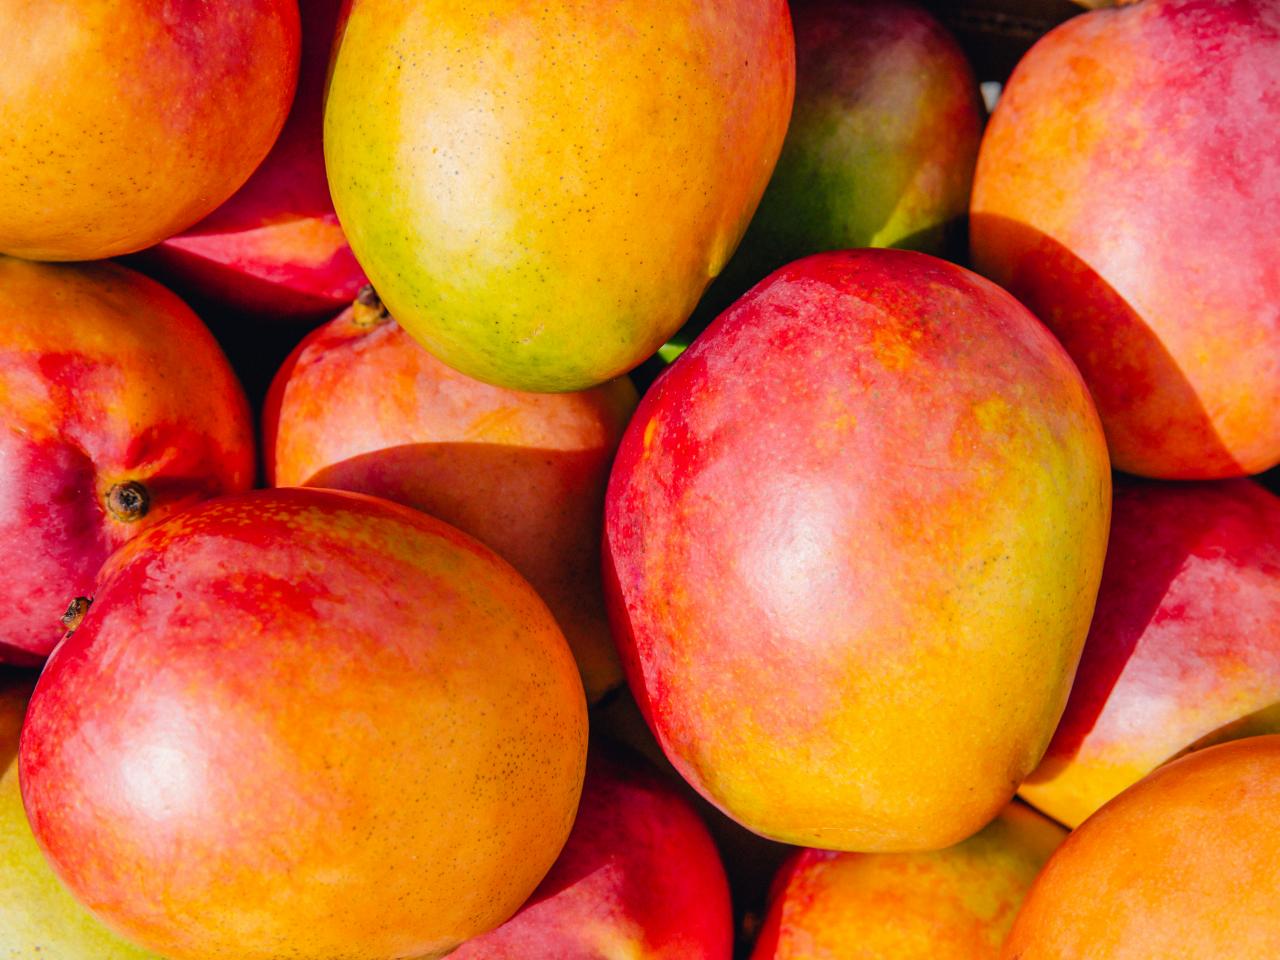 https://food.fnr.sndimg.com/content/dam/images/food/fullset/2023/6/1/close-up-of-mangoes-red-with-yellow-skins.jpg.rend.hgtvcom.1280.960.suffix/1685646276107.jpeg